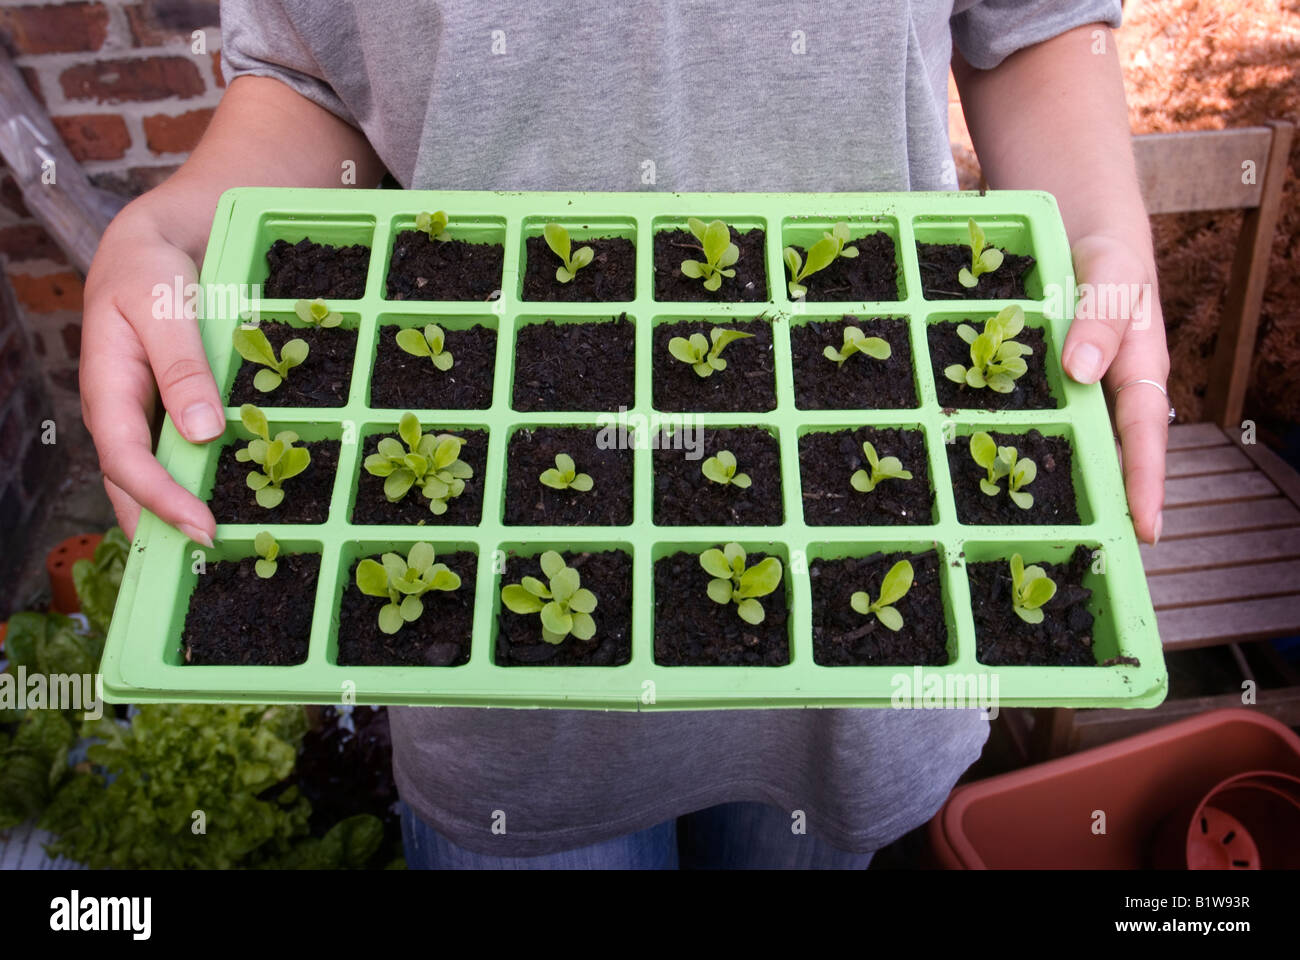 tray of lettuce seedlings held by a young woman wearing a grey t-shirt Stock Photo